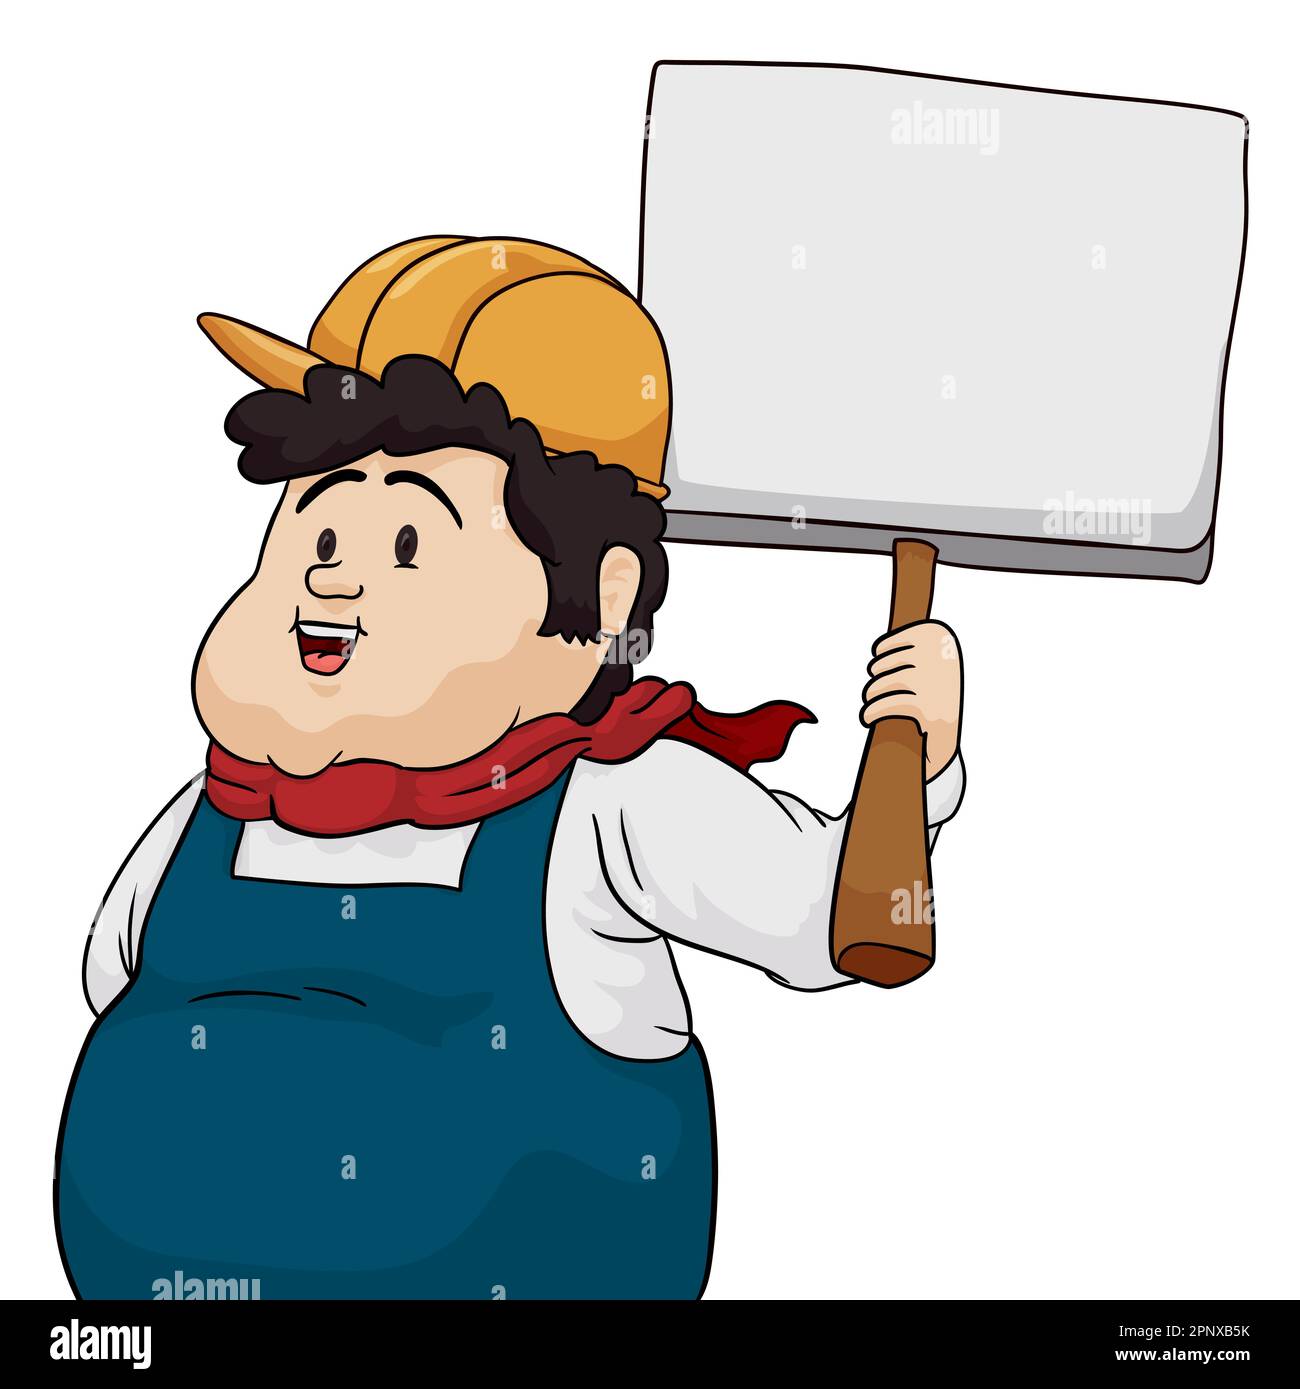 Template design with chubby brunette workman with hard hat, neckerchief and overalls, holding an empty placard. Design in cartoon style. Stock Vector